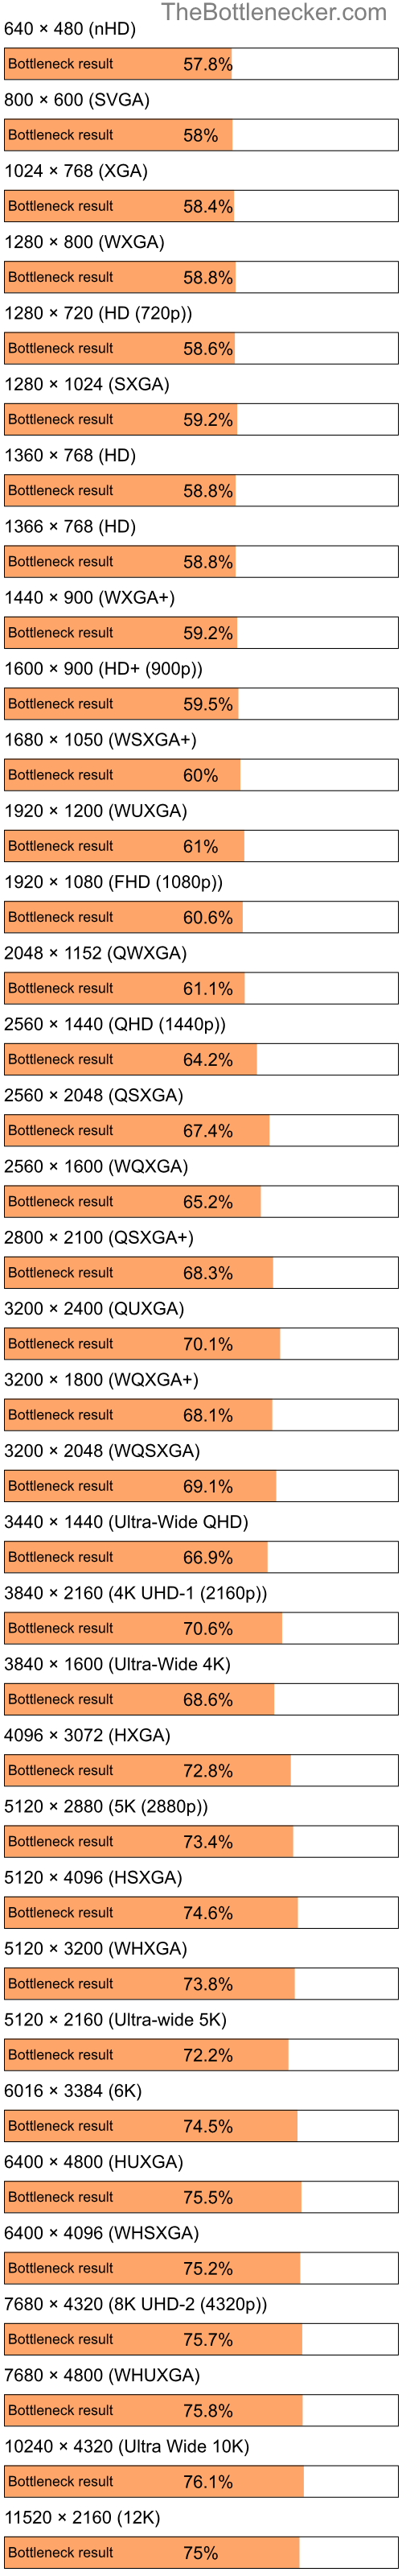 Bottleneck results by resolution for Intel Pentium 4 and AMD Radeon HD 4270 in7 Days to Die